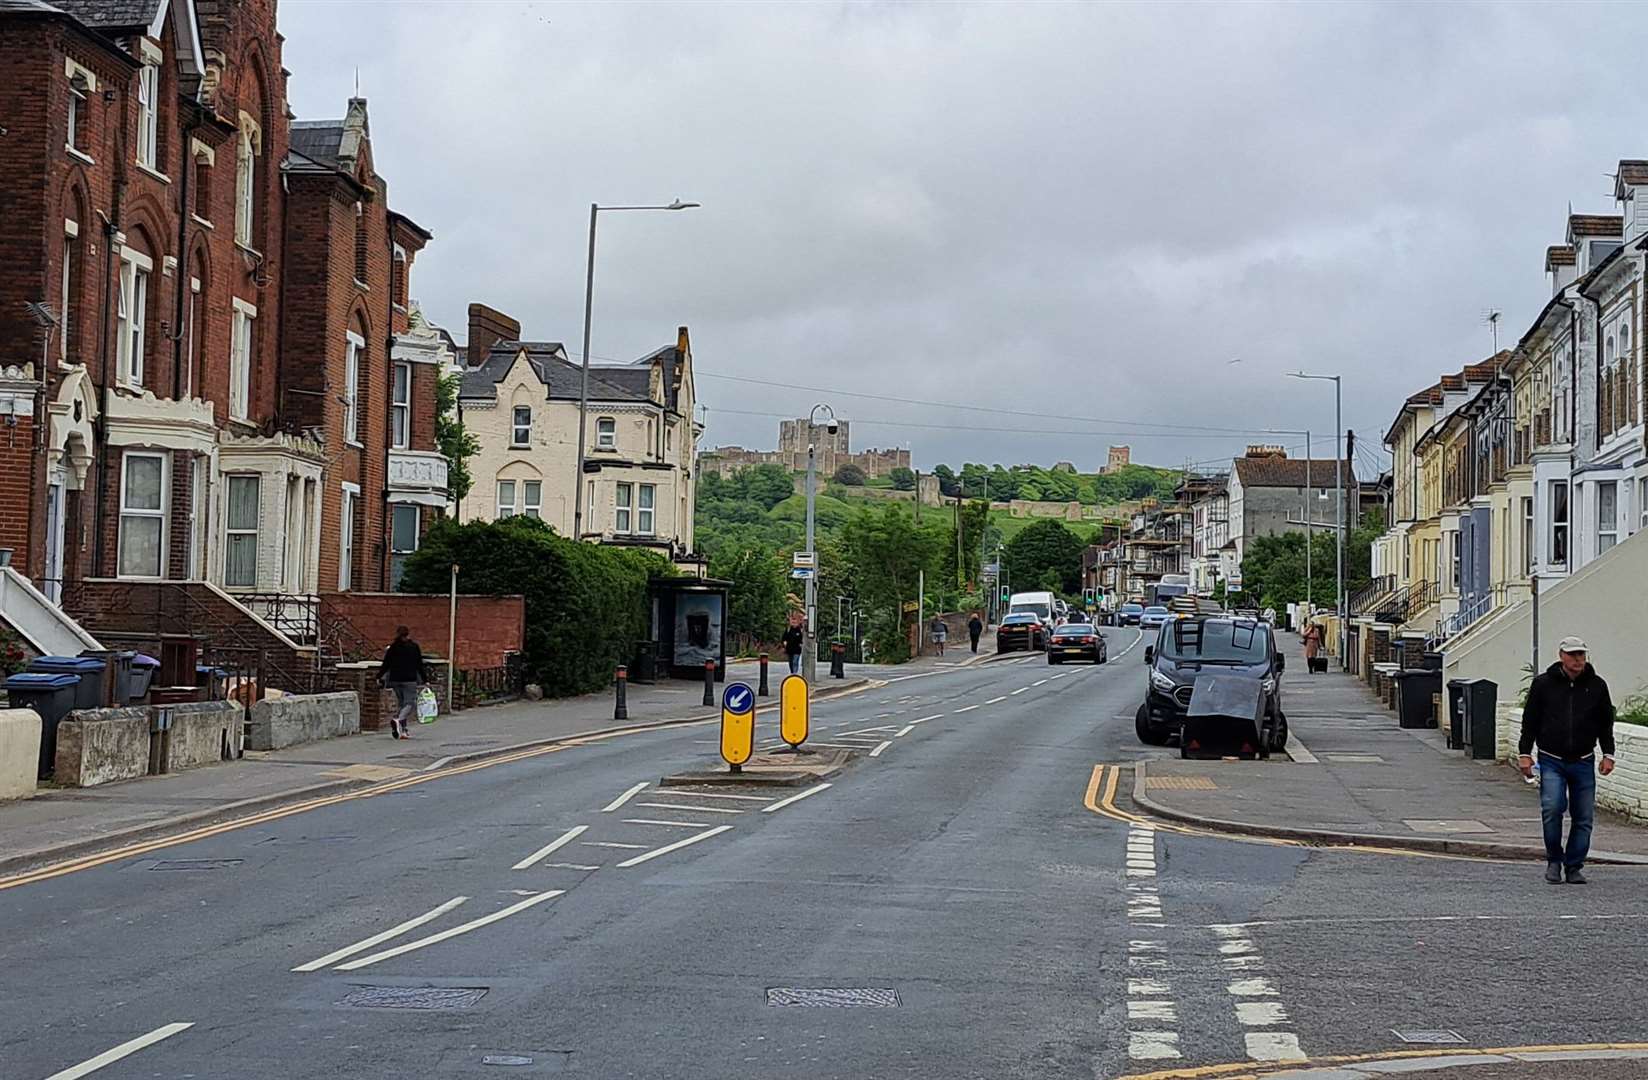 Folkestone Road in Dover has gained an unwelcome reputation over the years